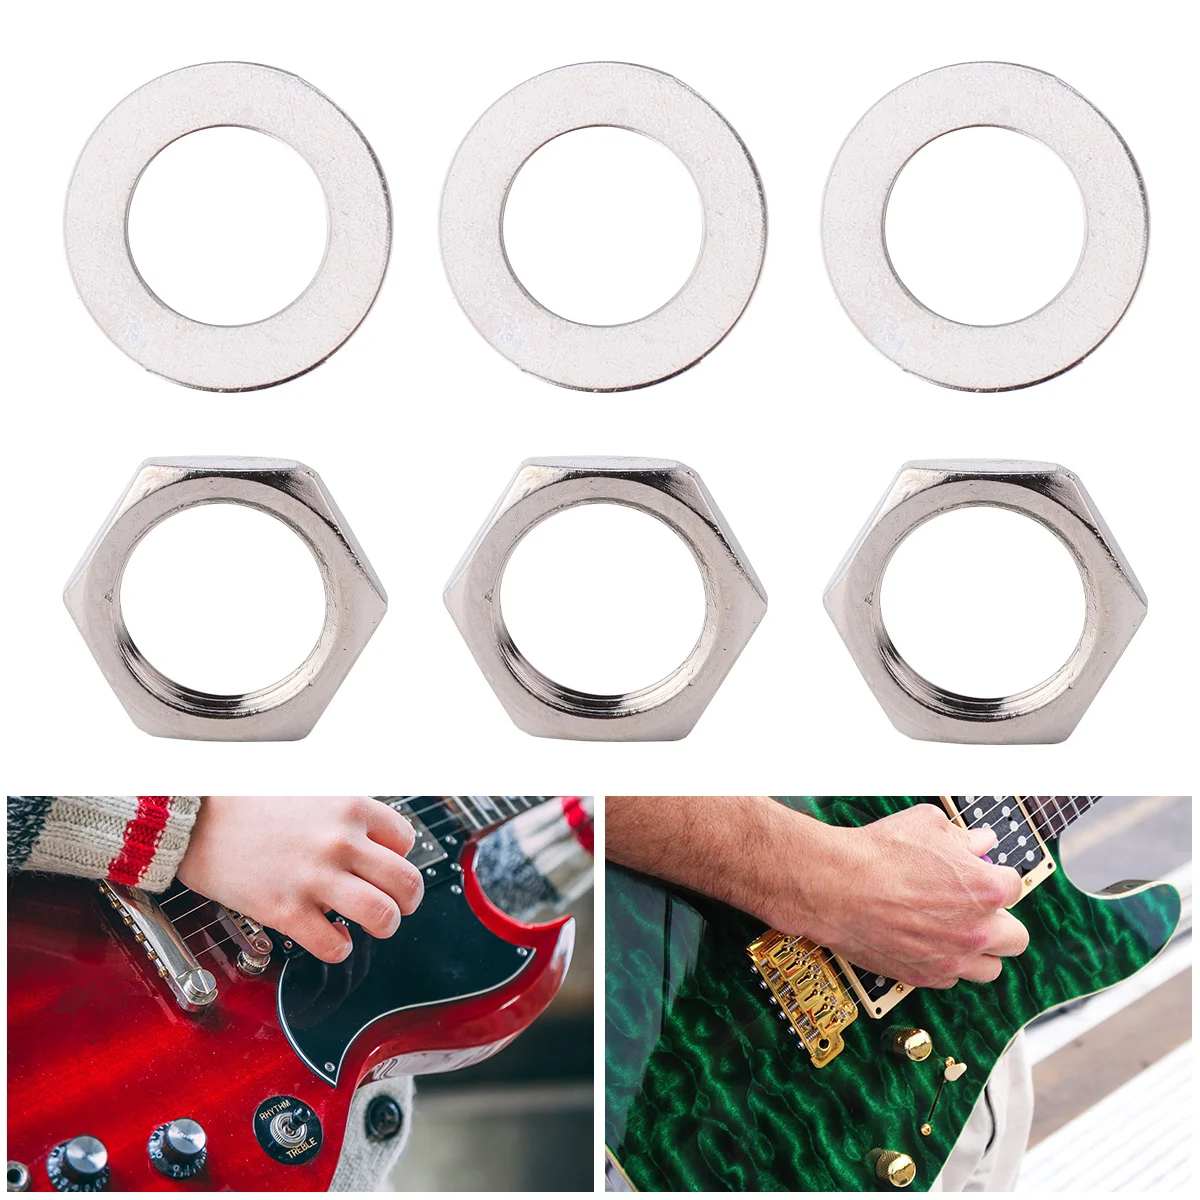 

40 Pcs Potentiometer Nut and Gasket Guitar Pots Nuts Washers Fittings Accessories